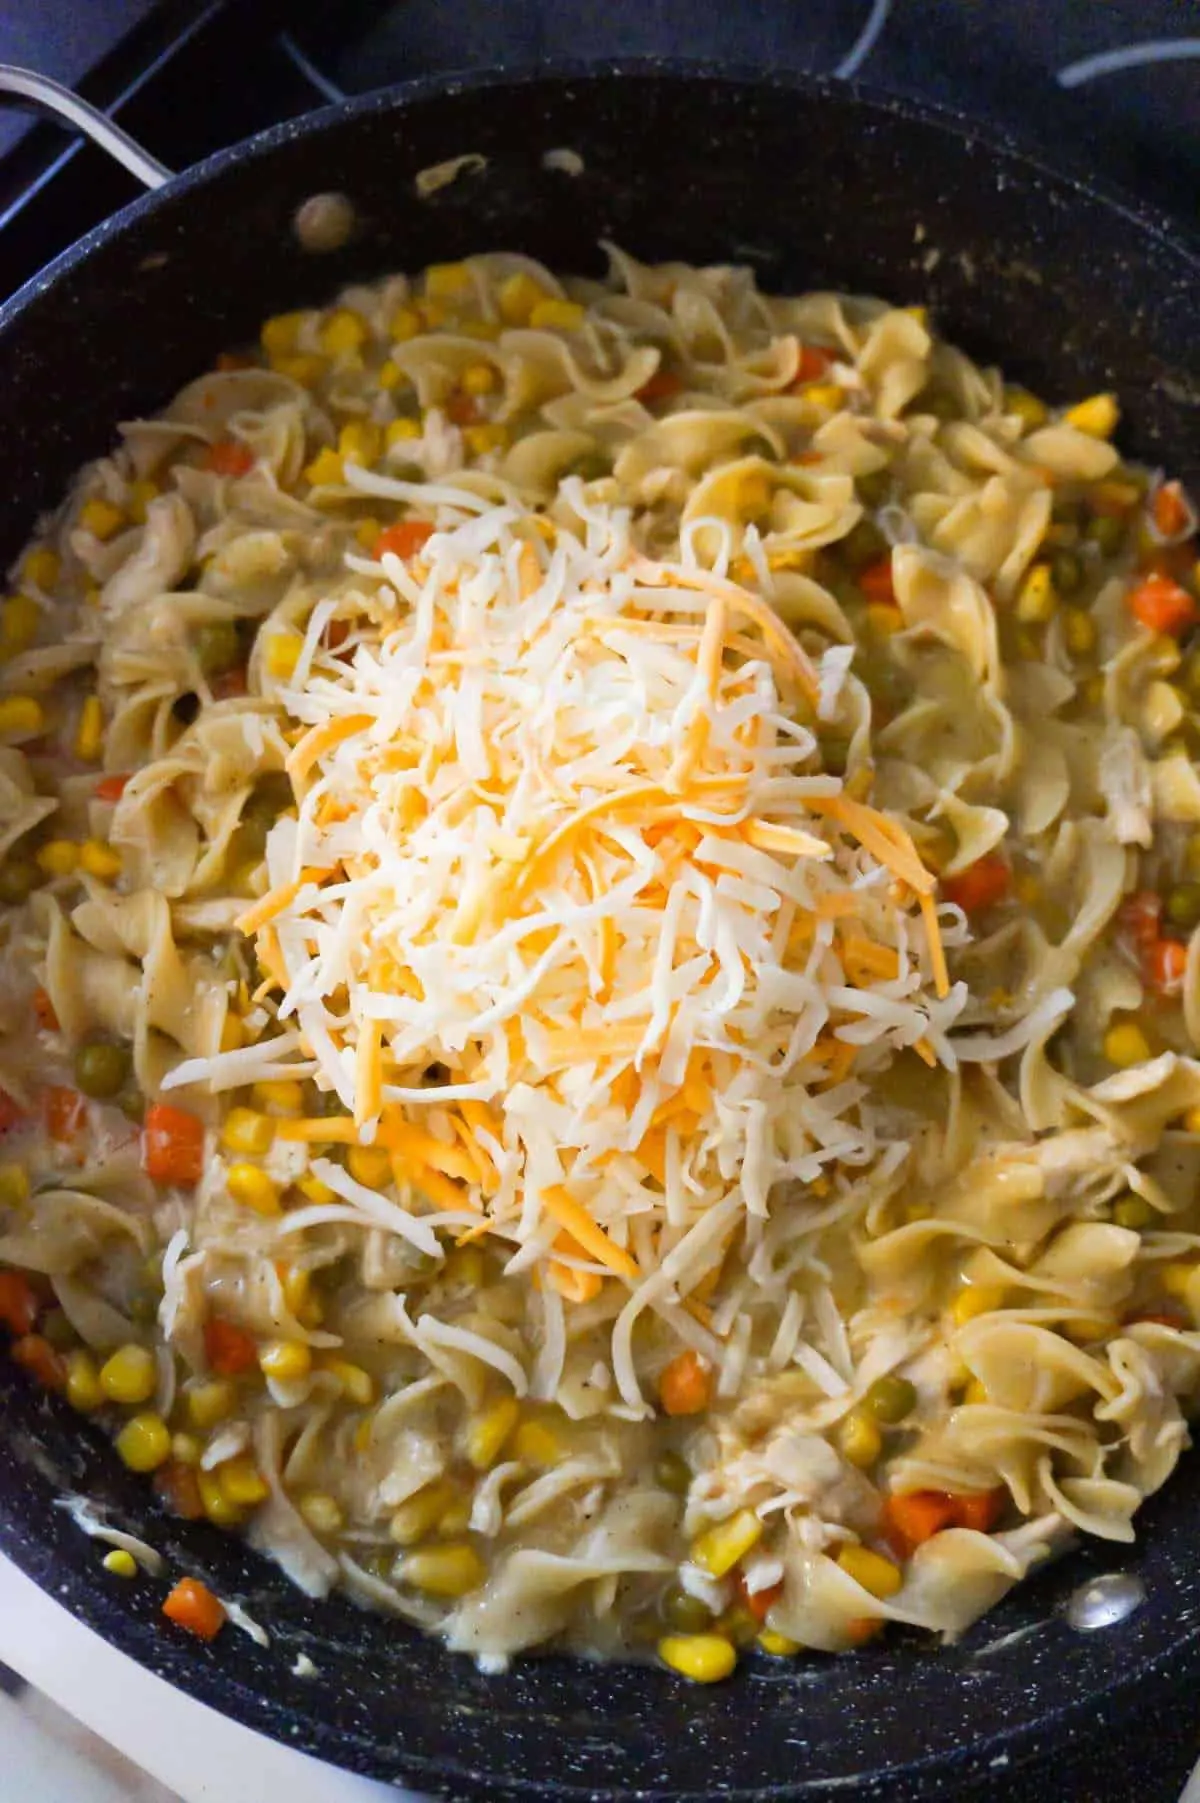 shredded mozzarella and cheddar cheese on top of creamy egg noodles in a pot